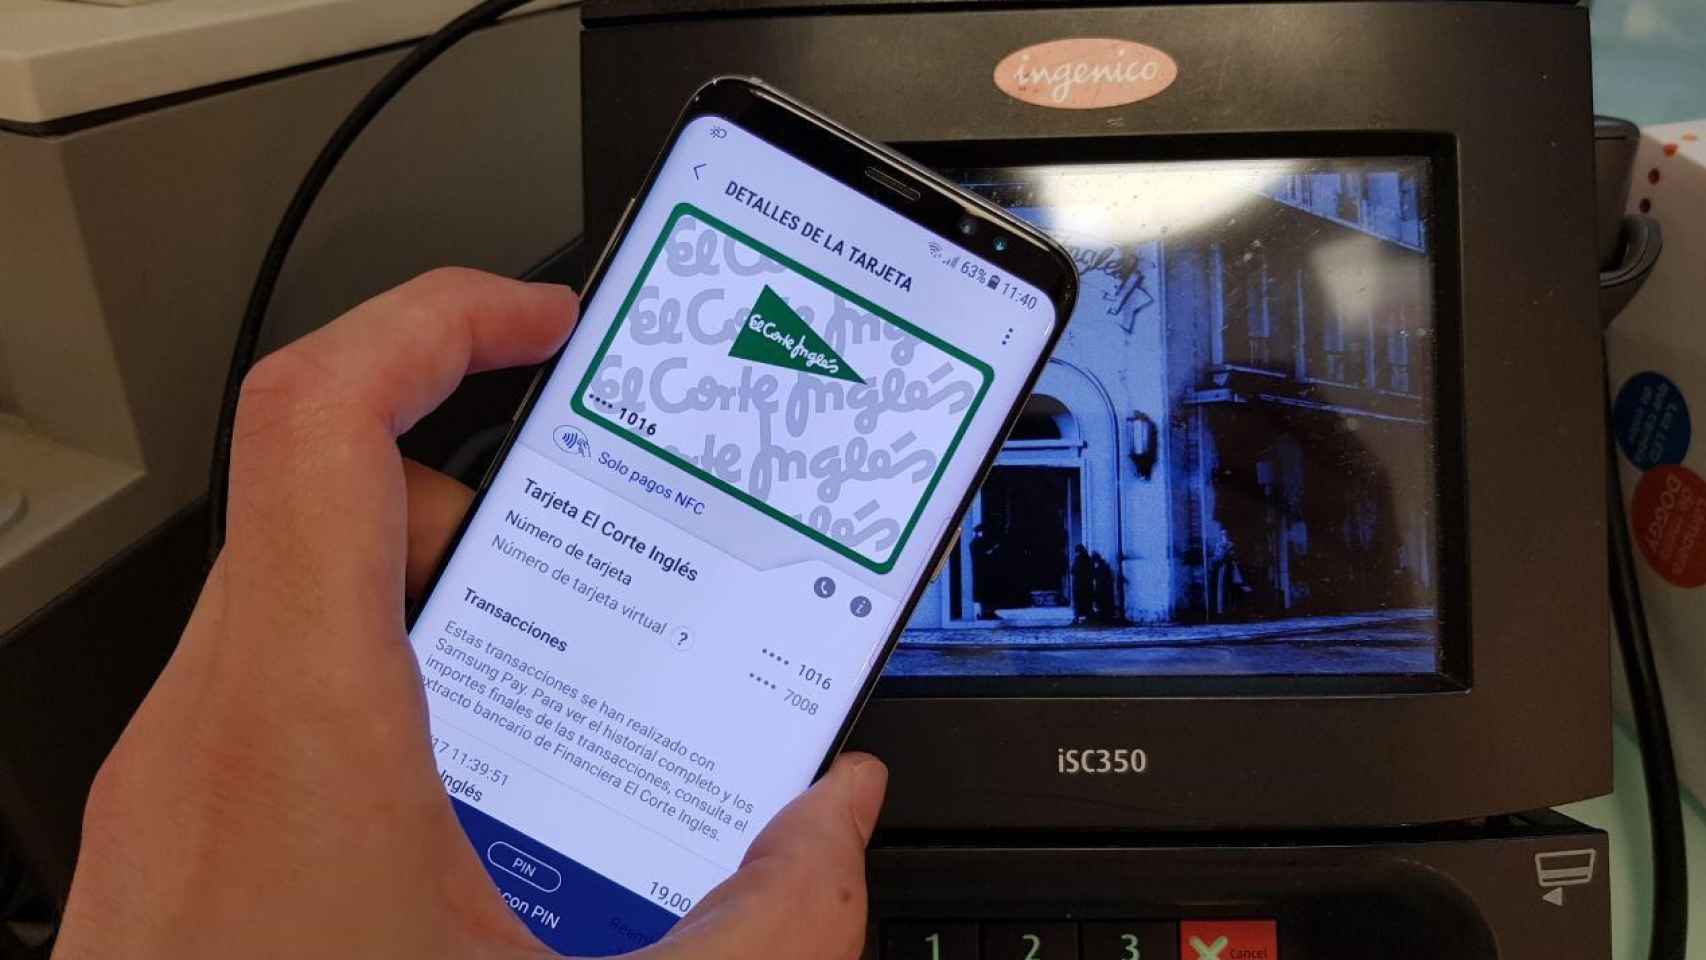 Samsung Pay is now compatible with the El Corte Inglés purchase card